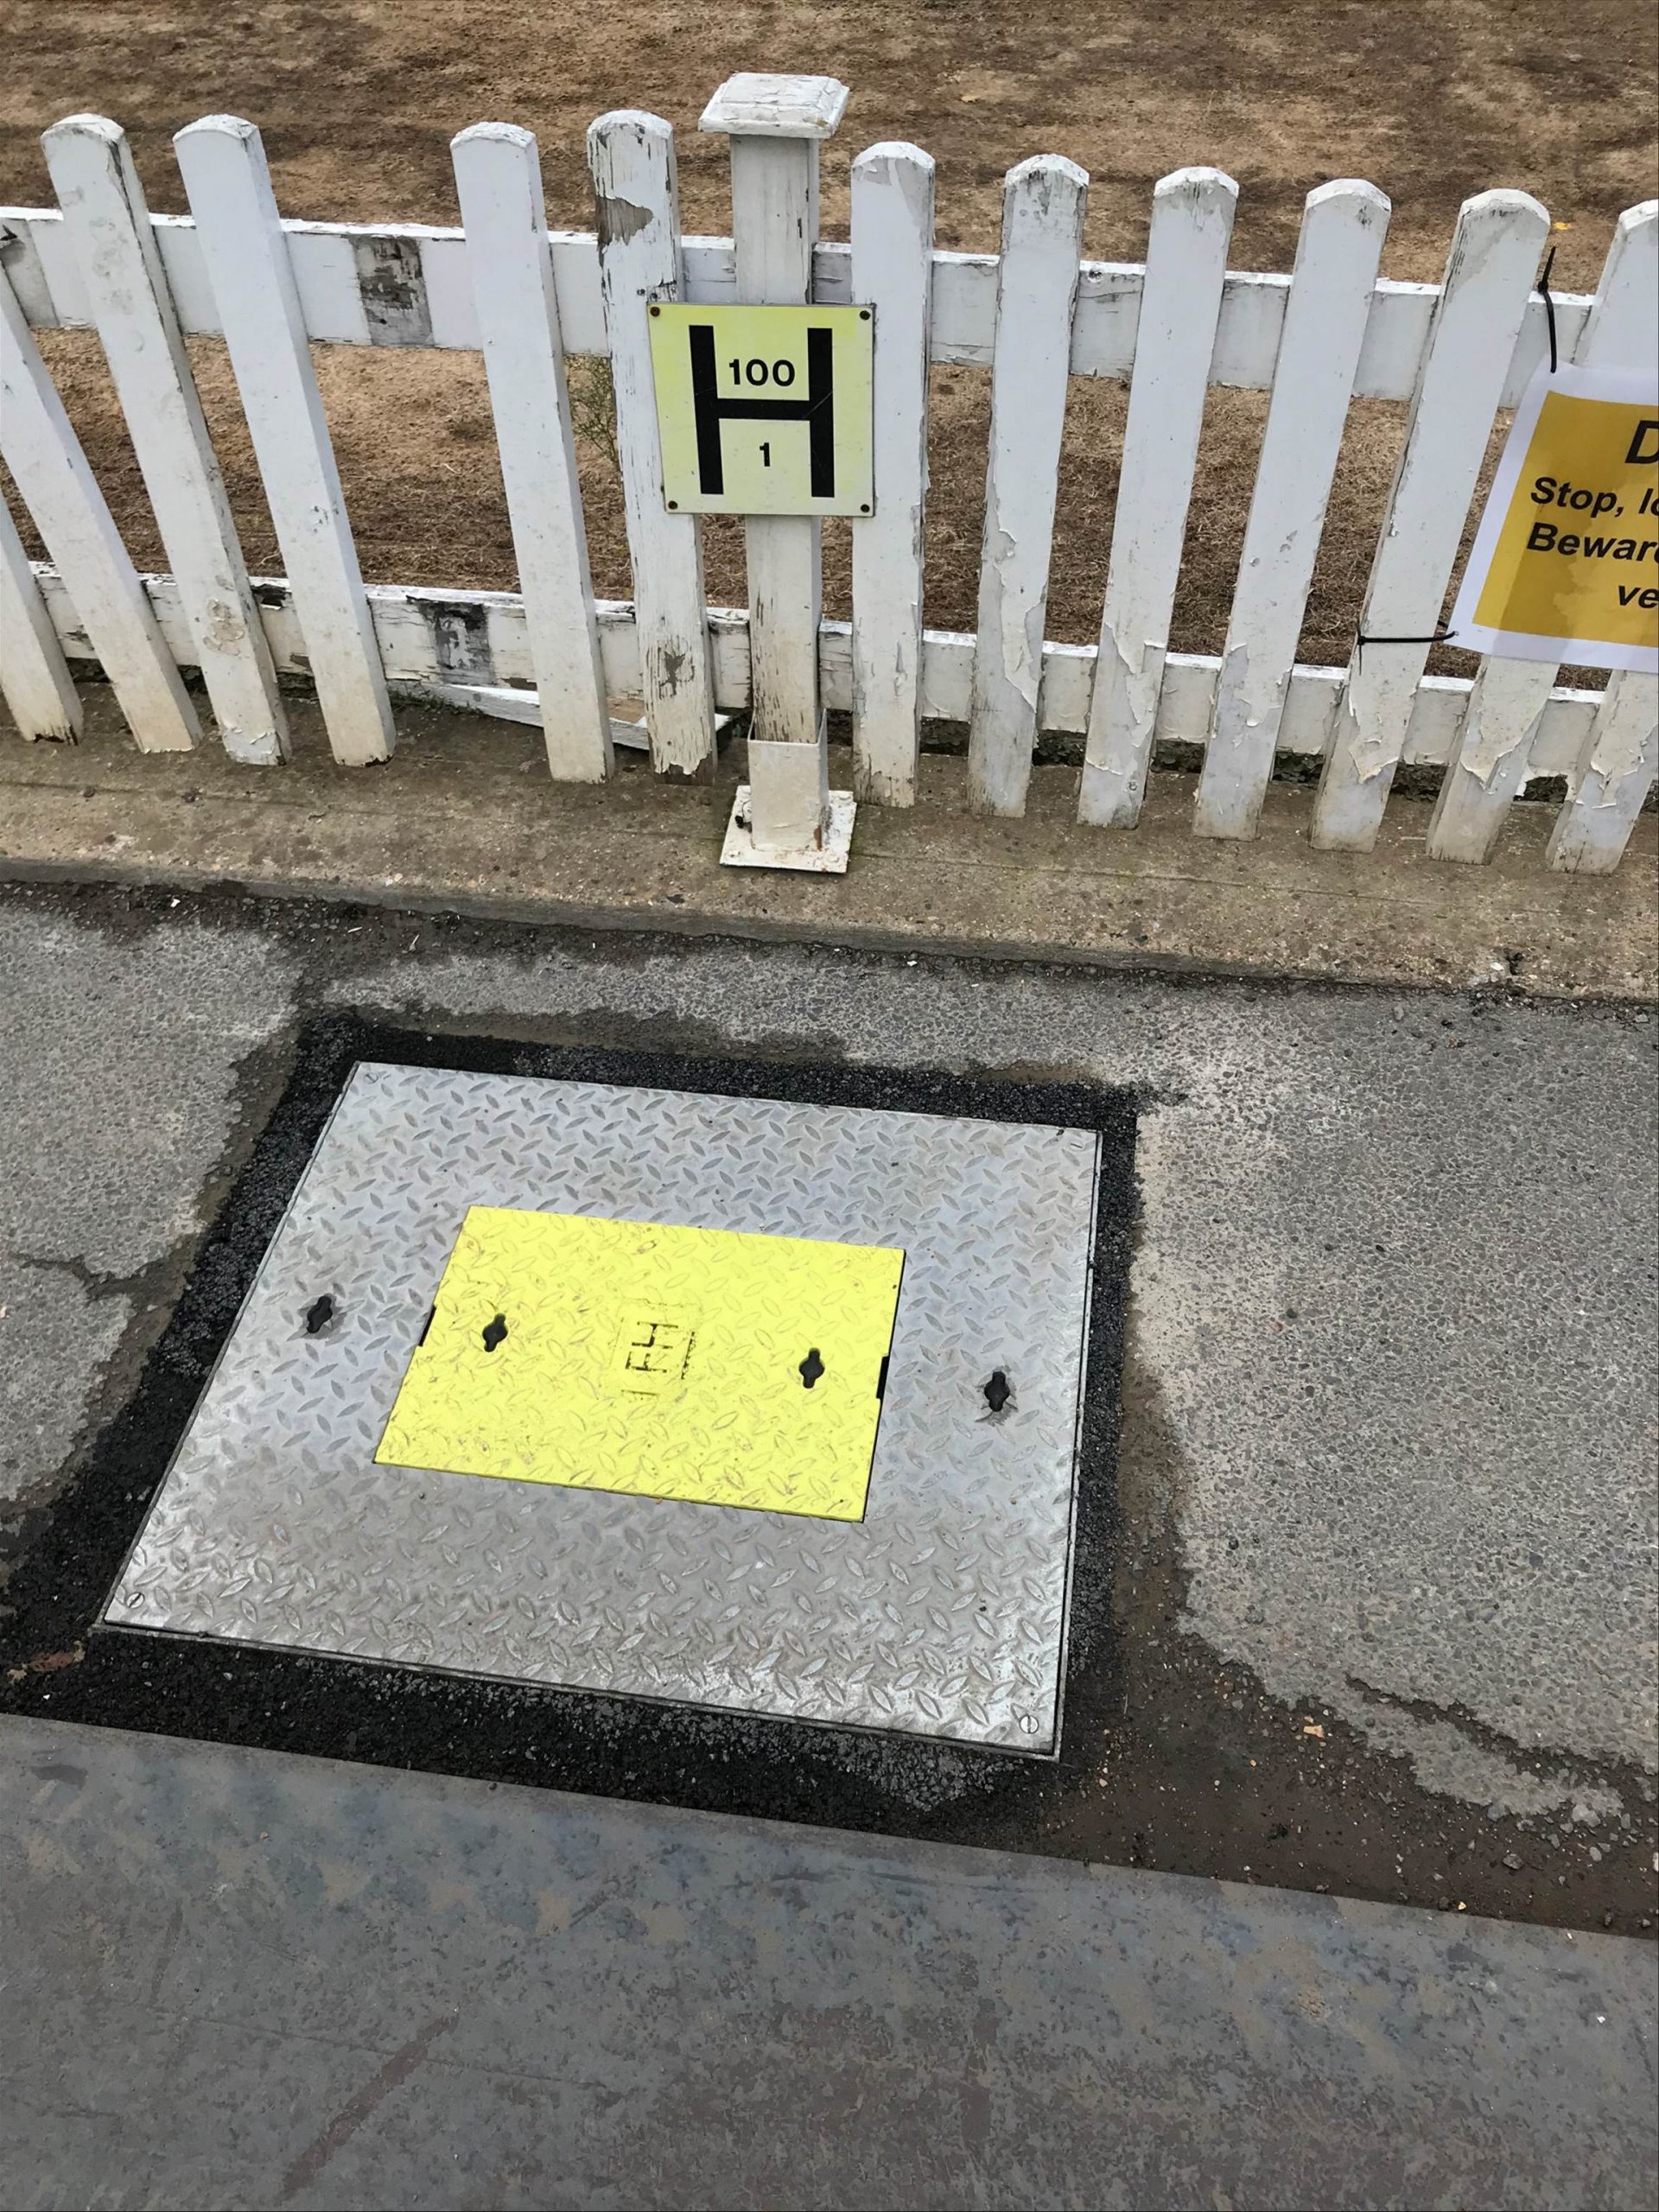 Bespoke fire hydrant steel access cover are Lord's Cricket Ground